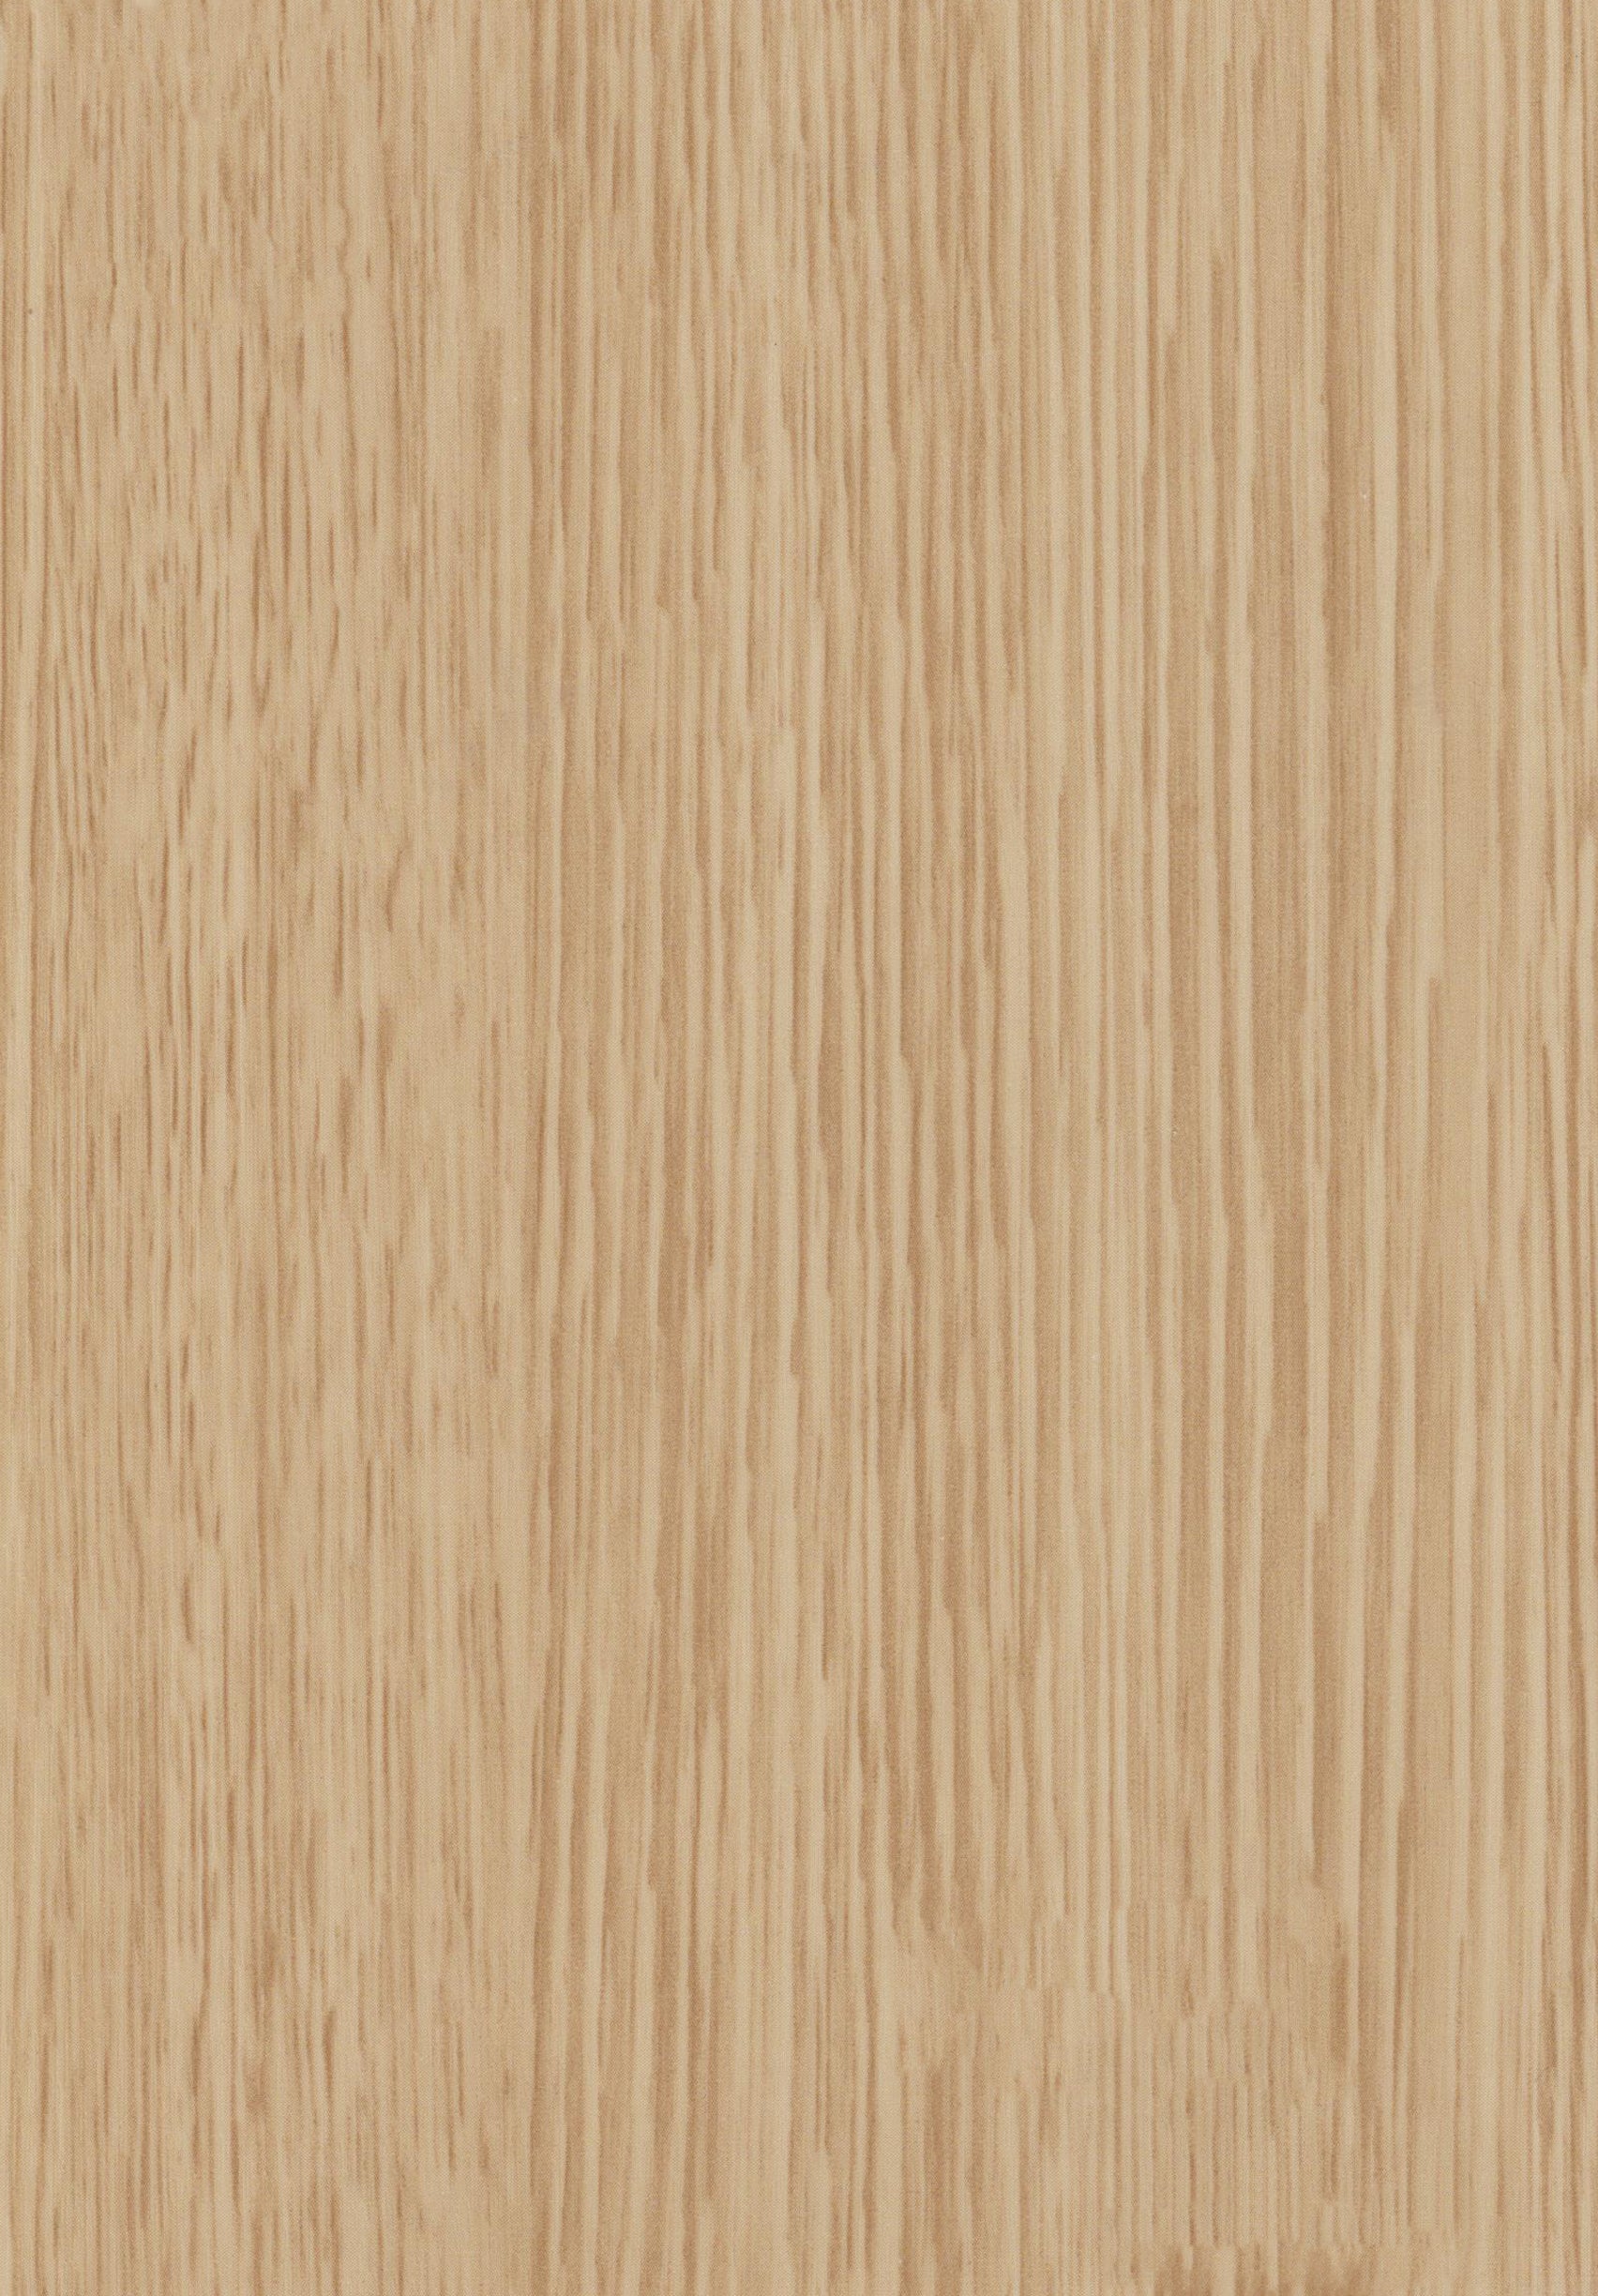 [2.9 meter] Golden Wood PVC Wall Panel | Fluted Wall Panel 3D ...